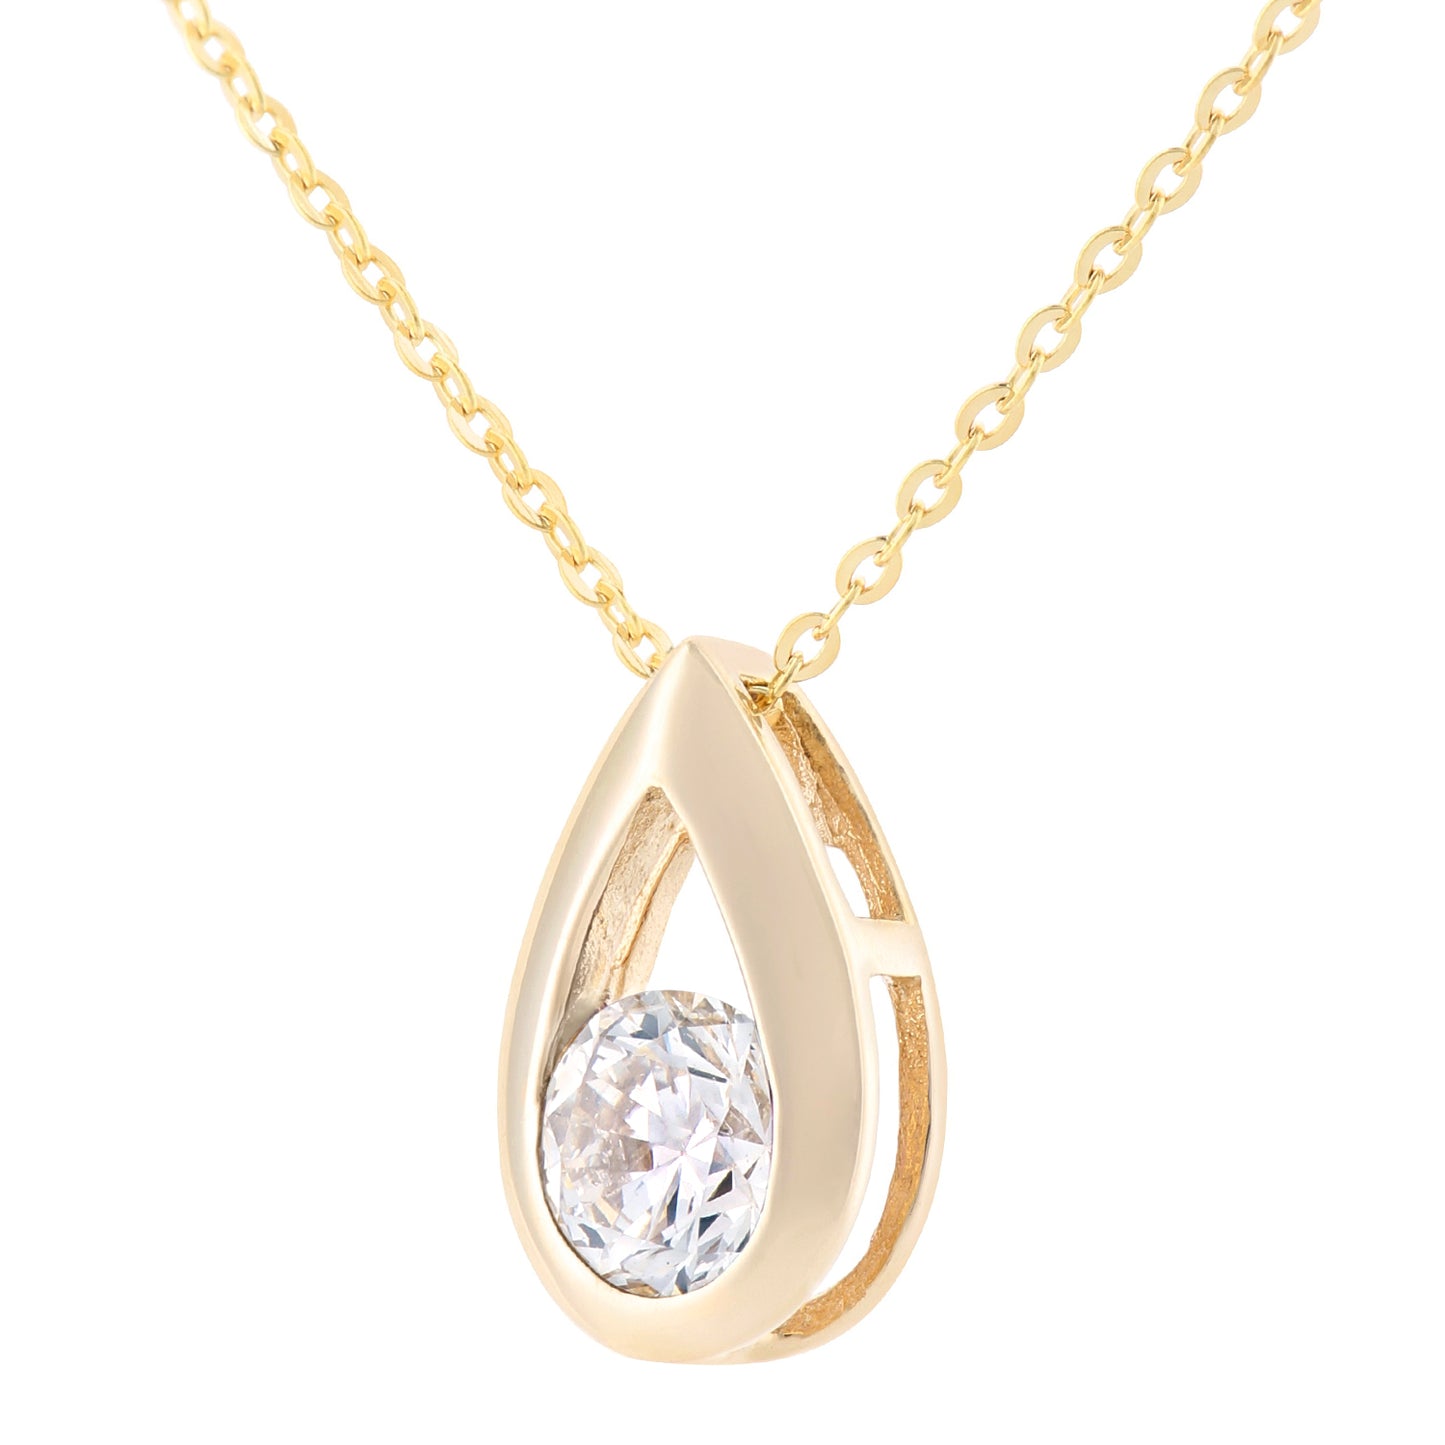 9ct Gold  Round 1/4ct Diamond Solitaire Pendant Necklace 18 inch - PP0AXL1715YDia